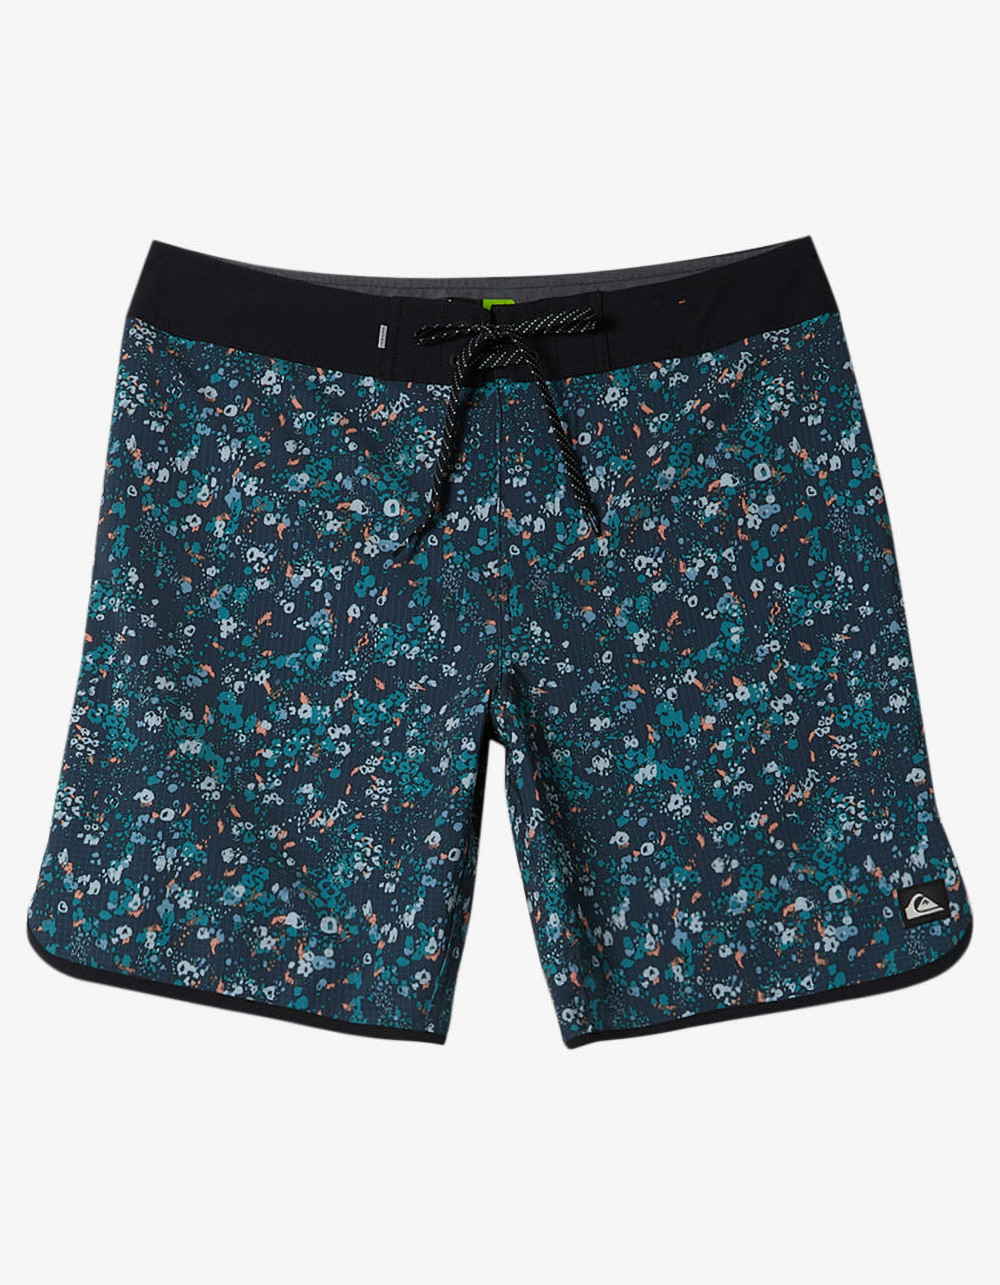 QUIKSILVER Highline Scallop Mens 19" Boardshorts